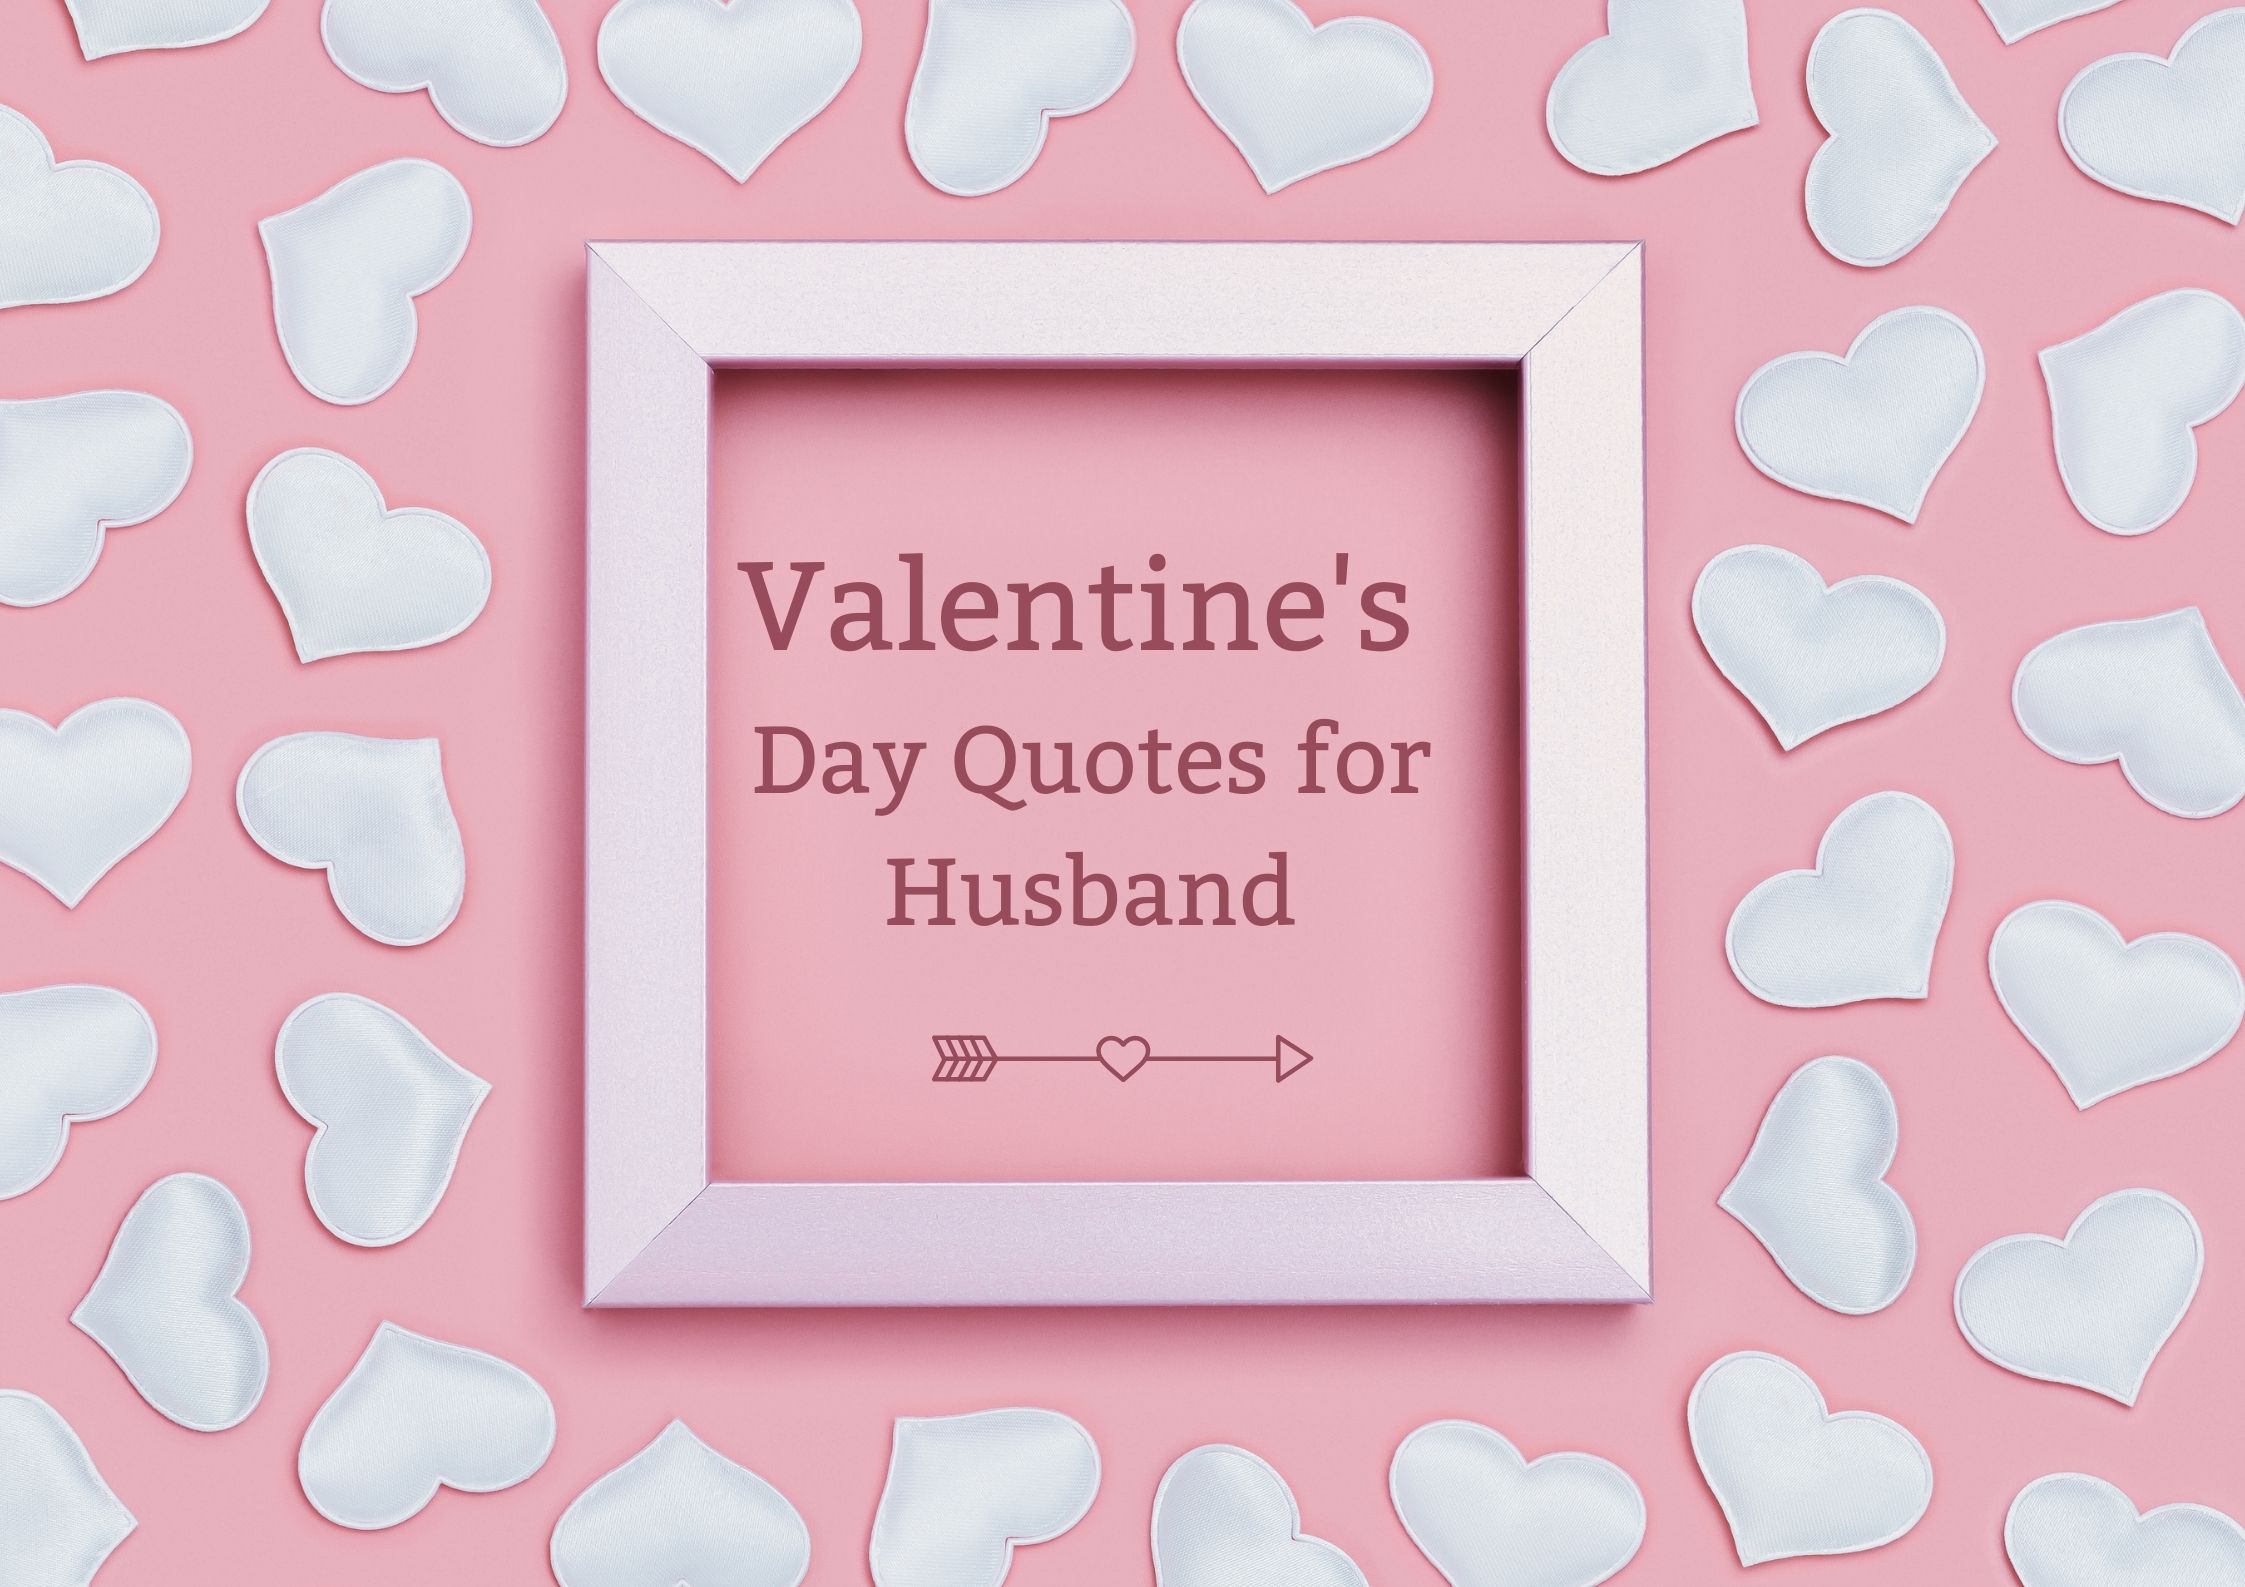 Valentines Day Quotes for Husband